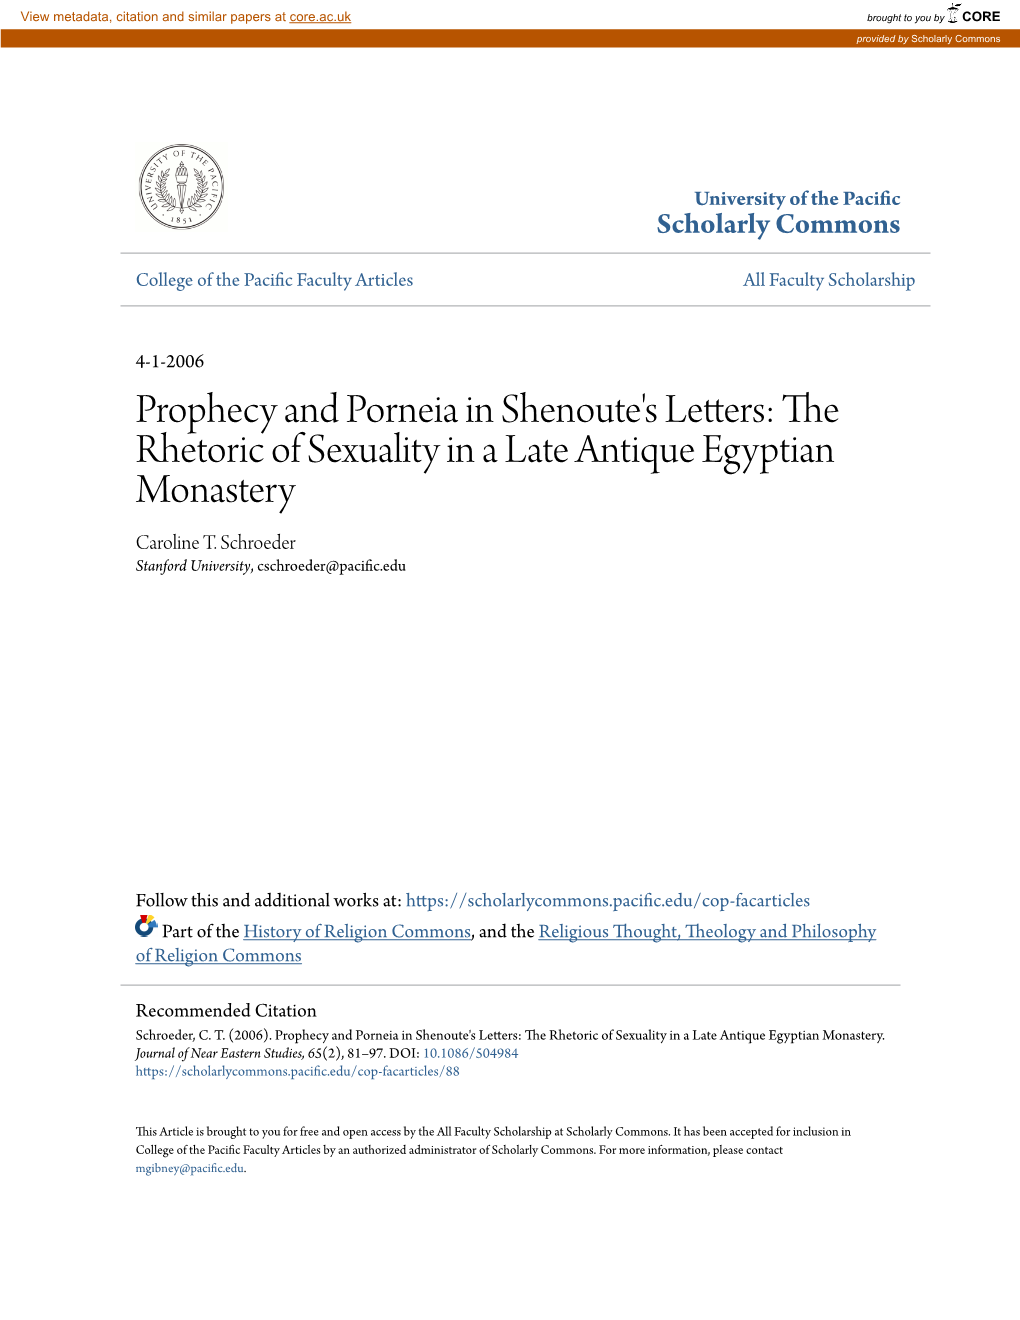 Prophecy and Porneia in Shenoute's Letters: the Rhetoric of Sexuality in a Late Antique Egyptian Monastery Caroline T